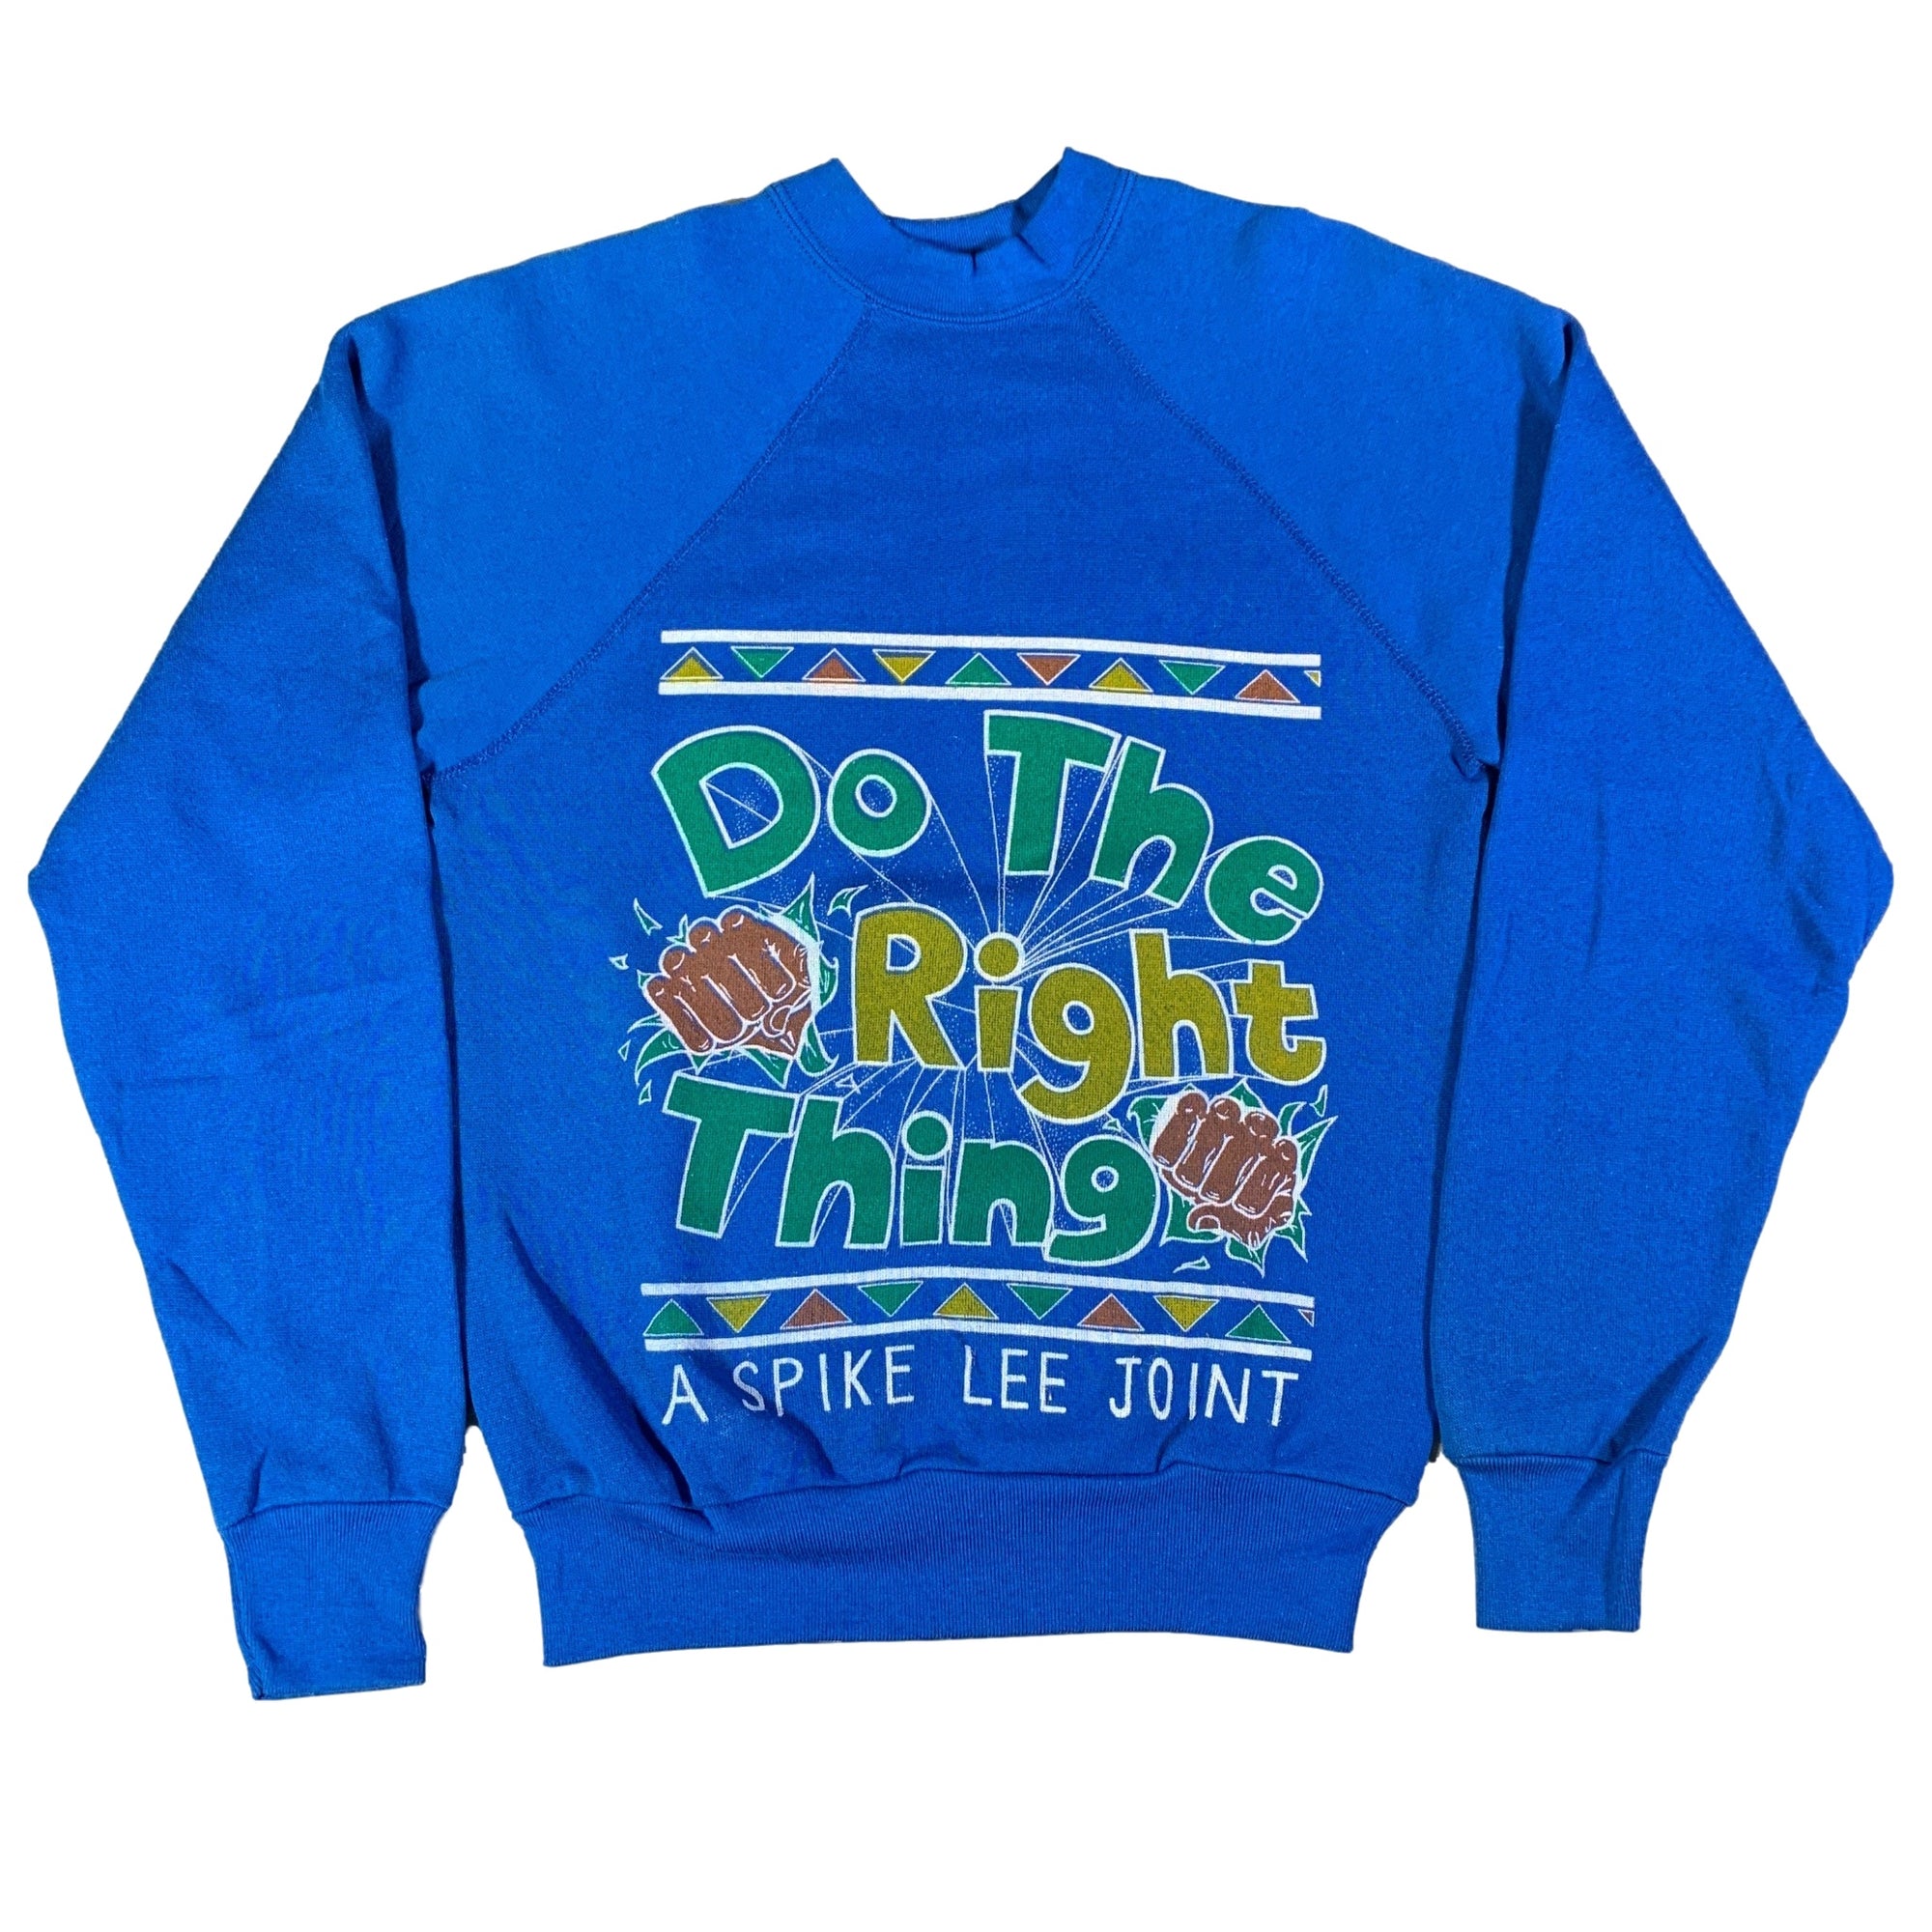 Vintage Do The Right Thing "A Spike Lee Joint" Crewneck Sweatshirt - jointcustodydc